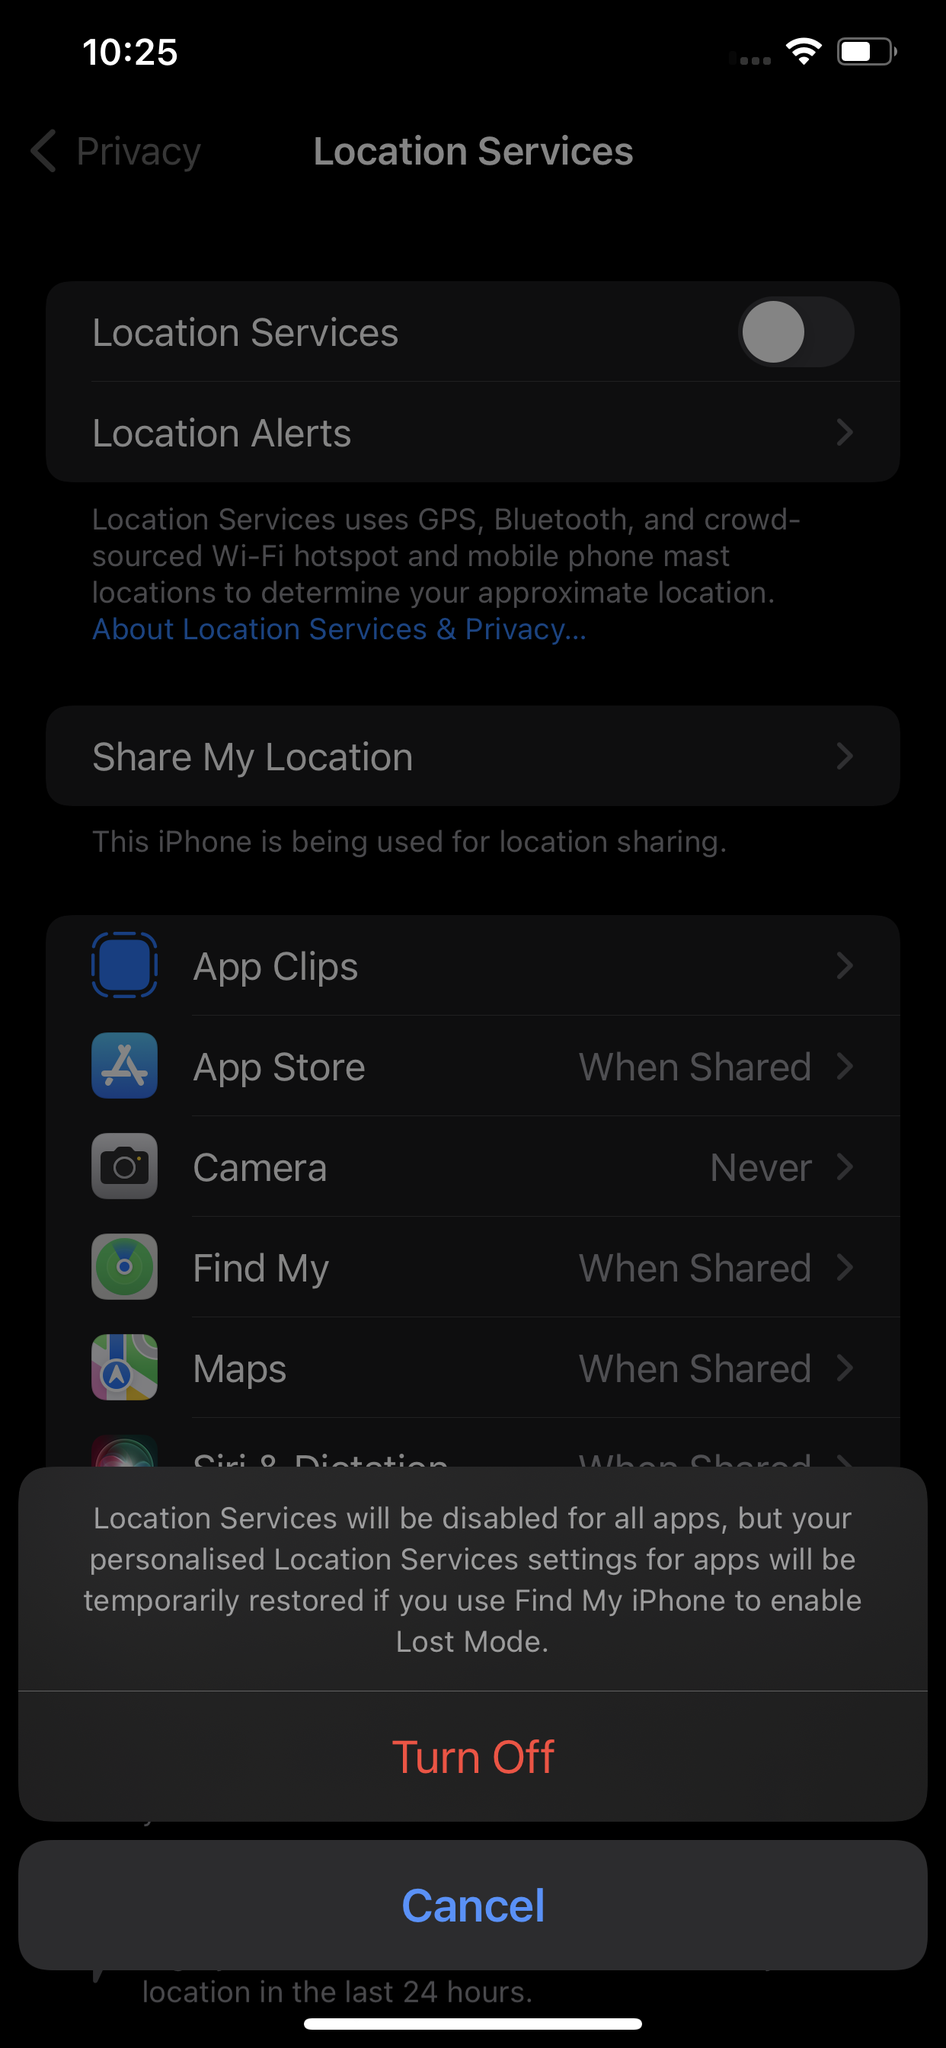 Turning Off Location Services in iPhone's Privacy Settings